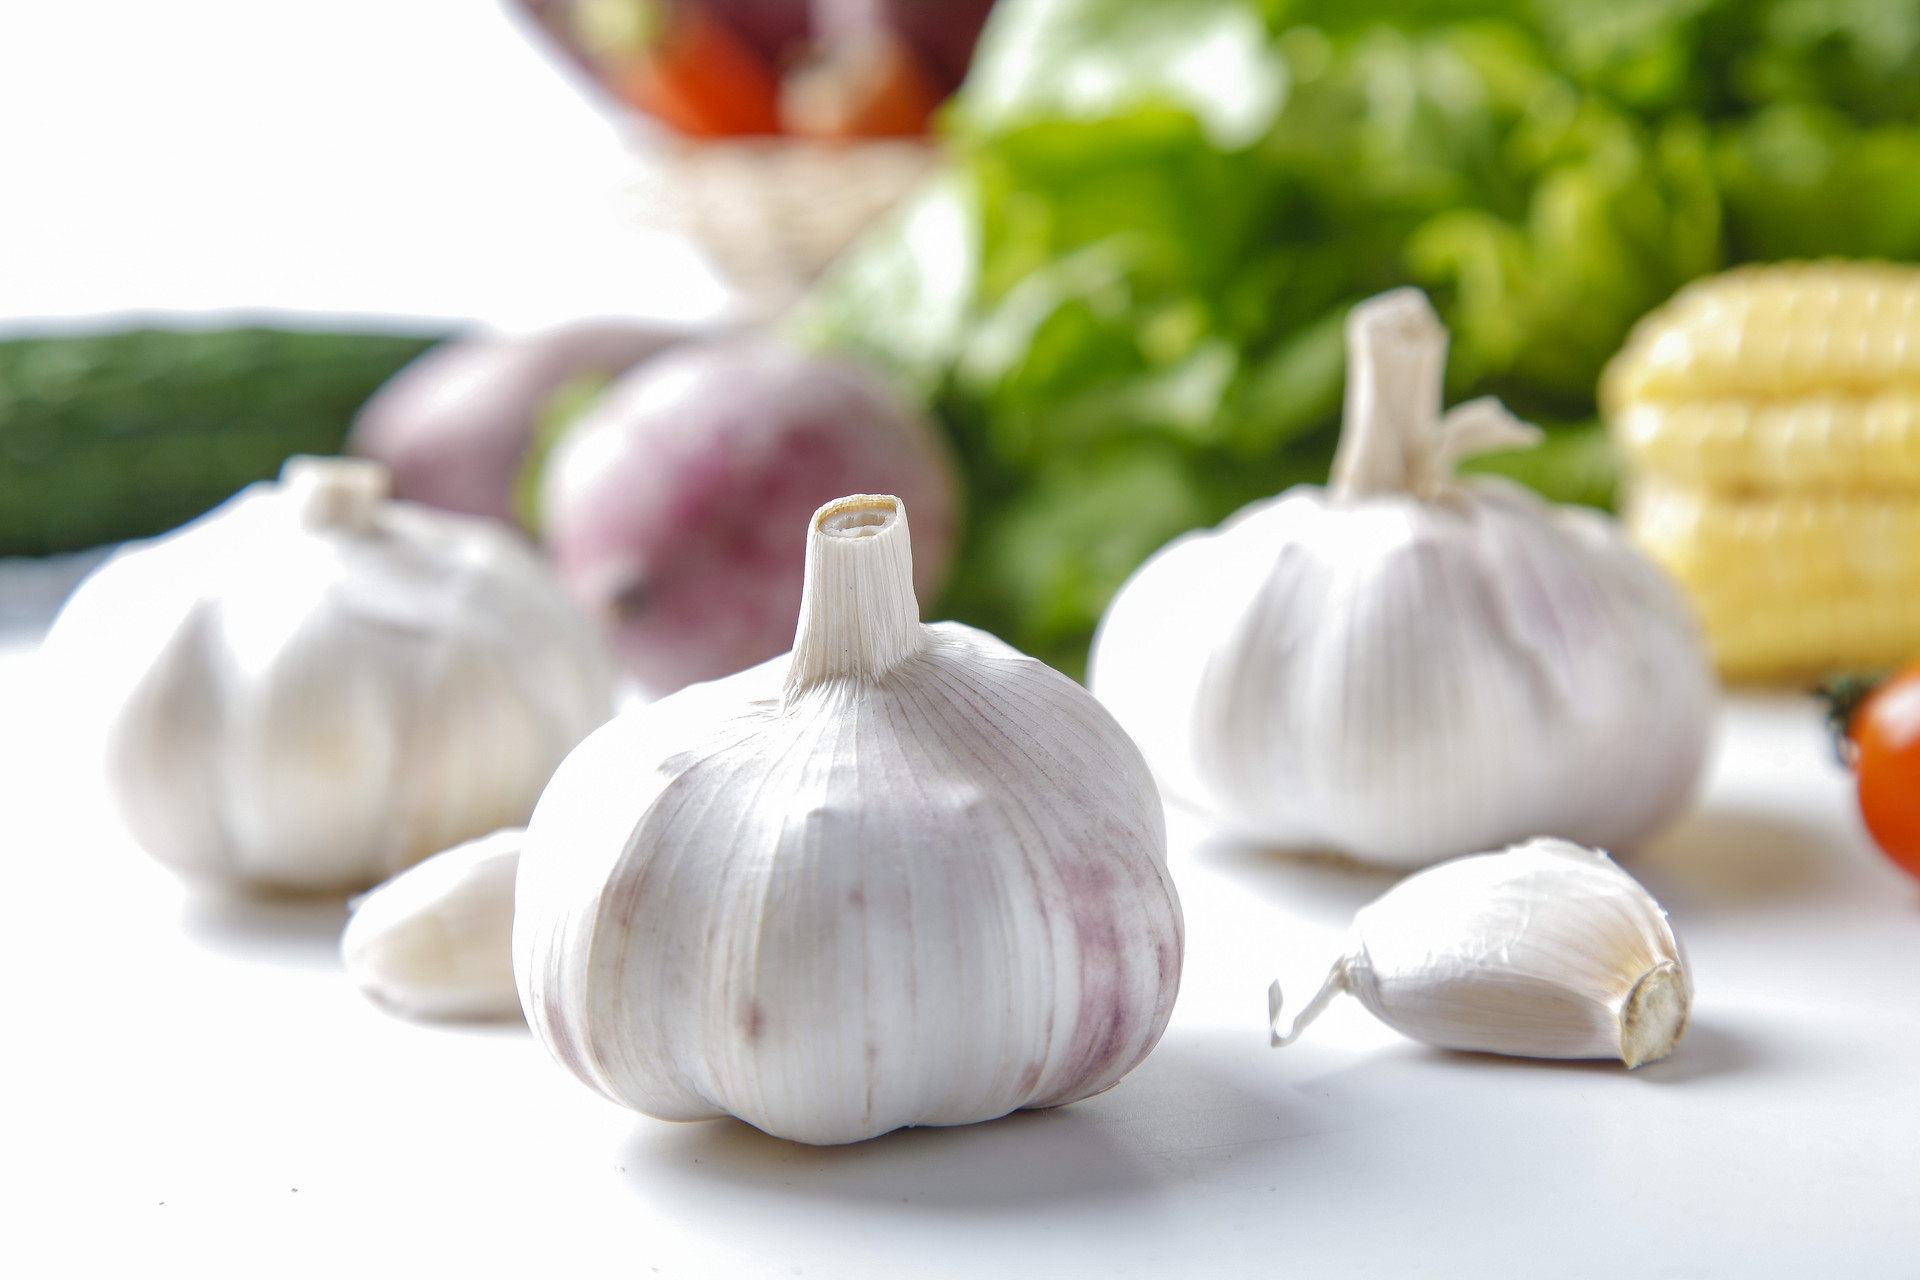 Why doesn’t garlic germinate in the supermarket, buy it and let it sprout for a few days?